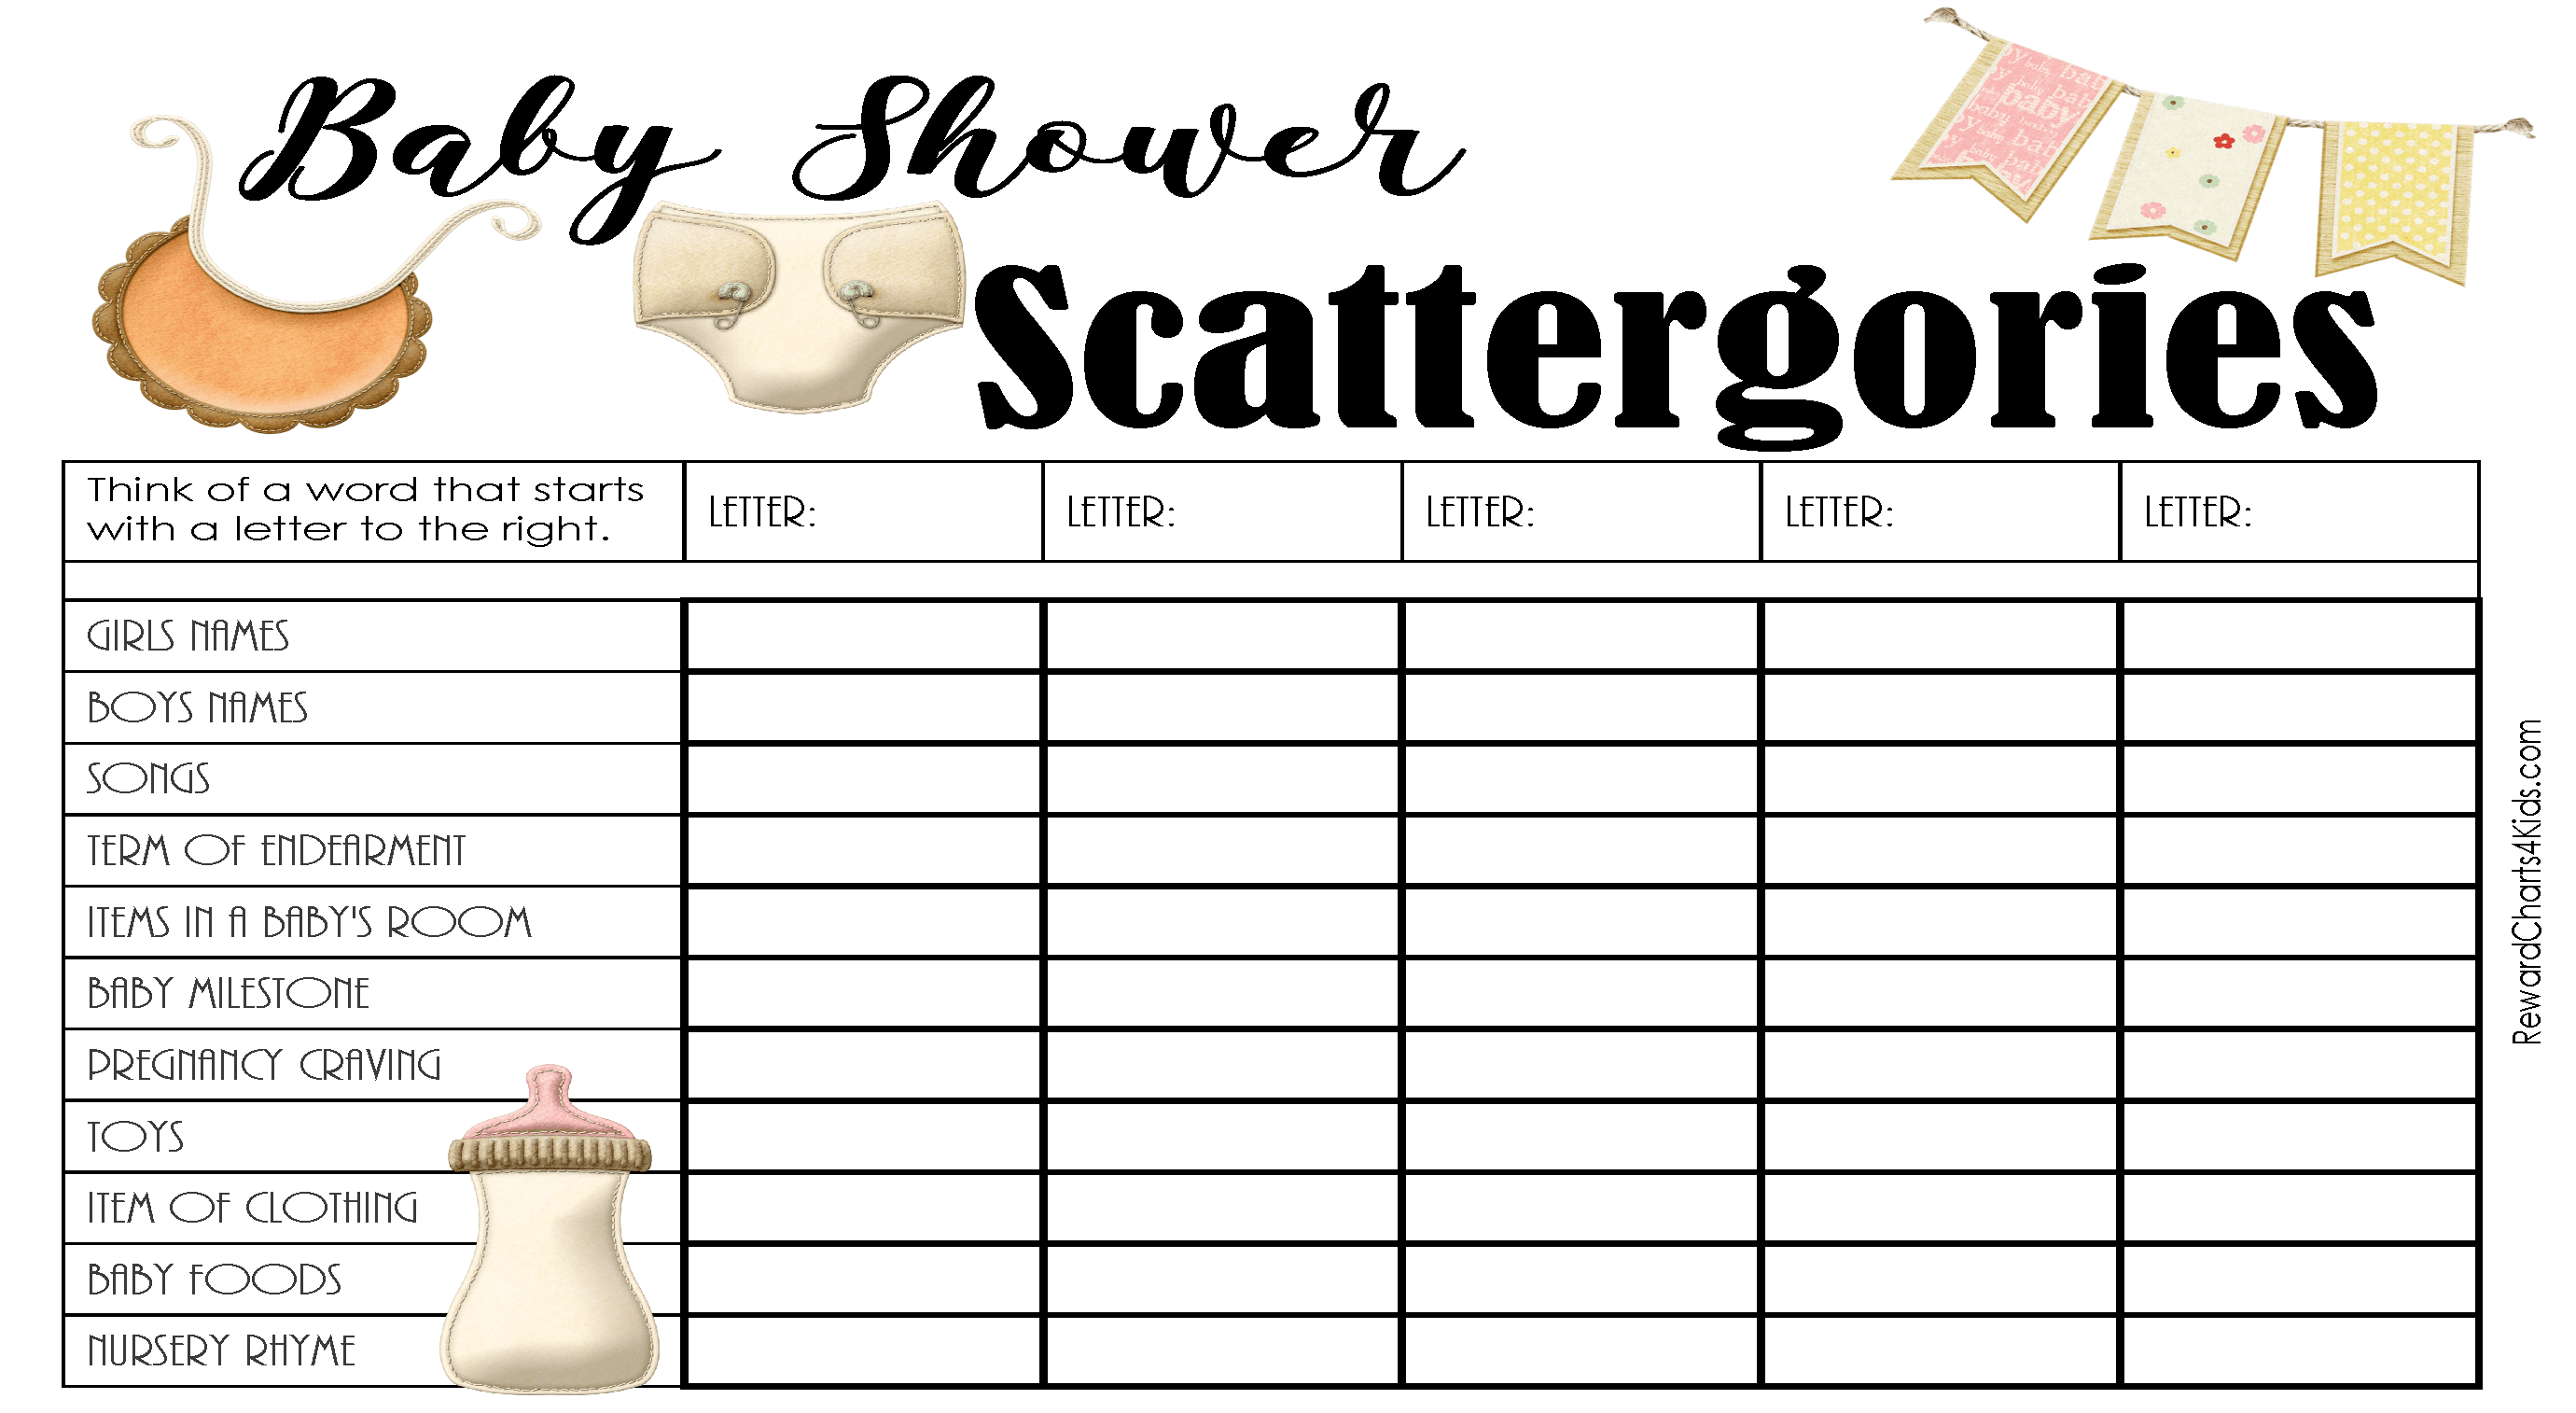 scattergories questions lists downloadable free